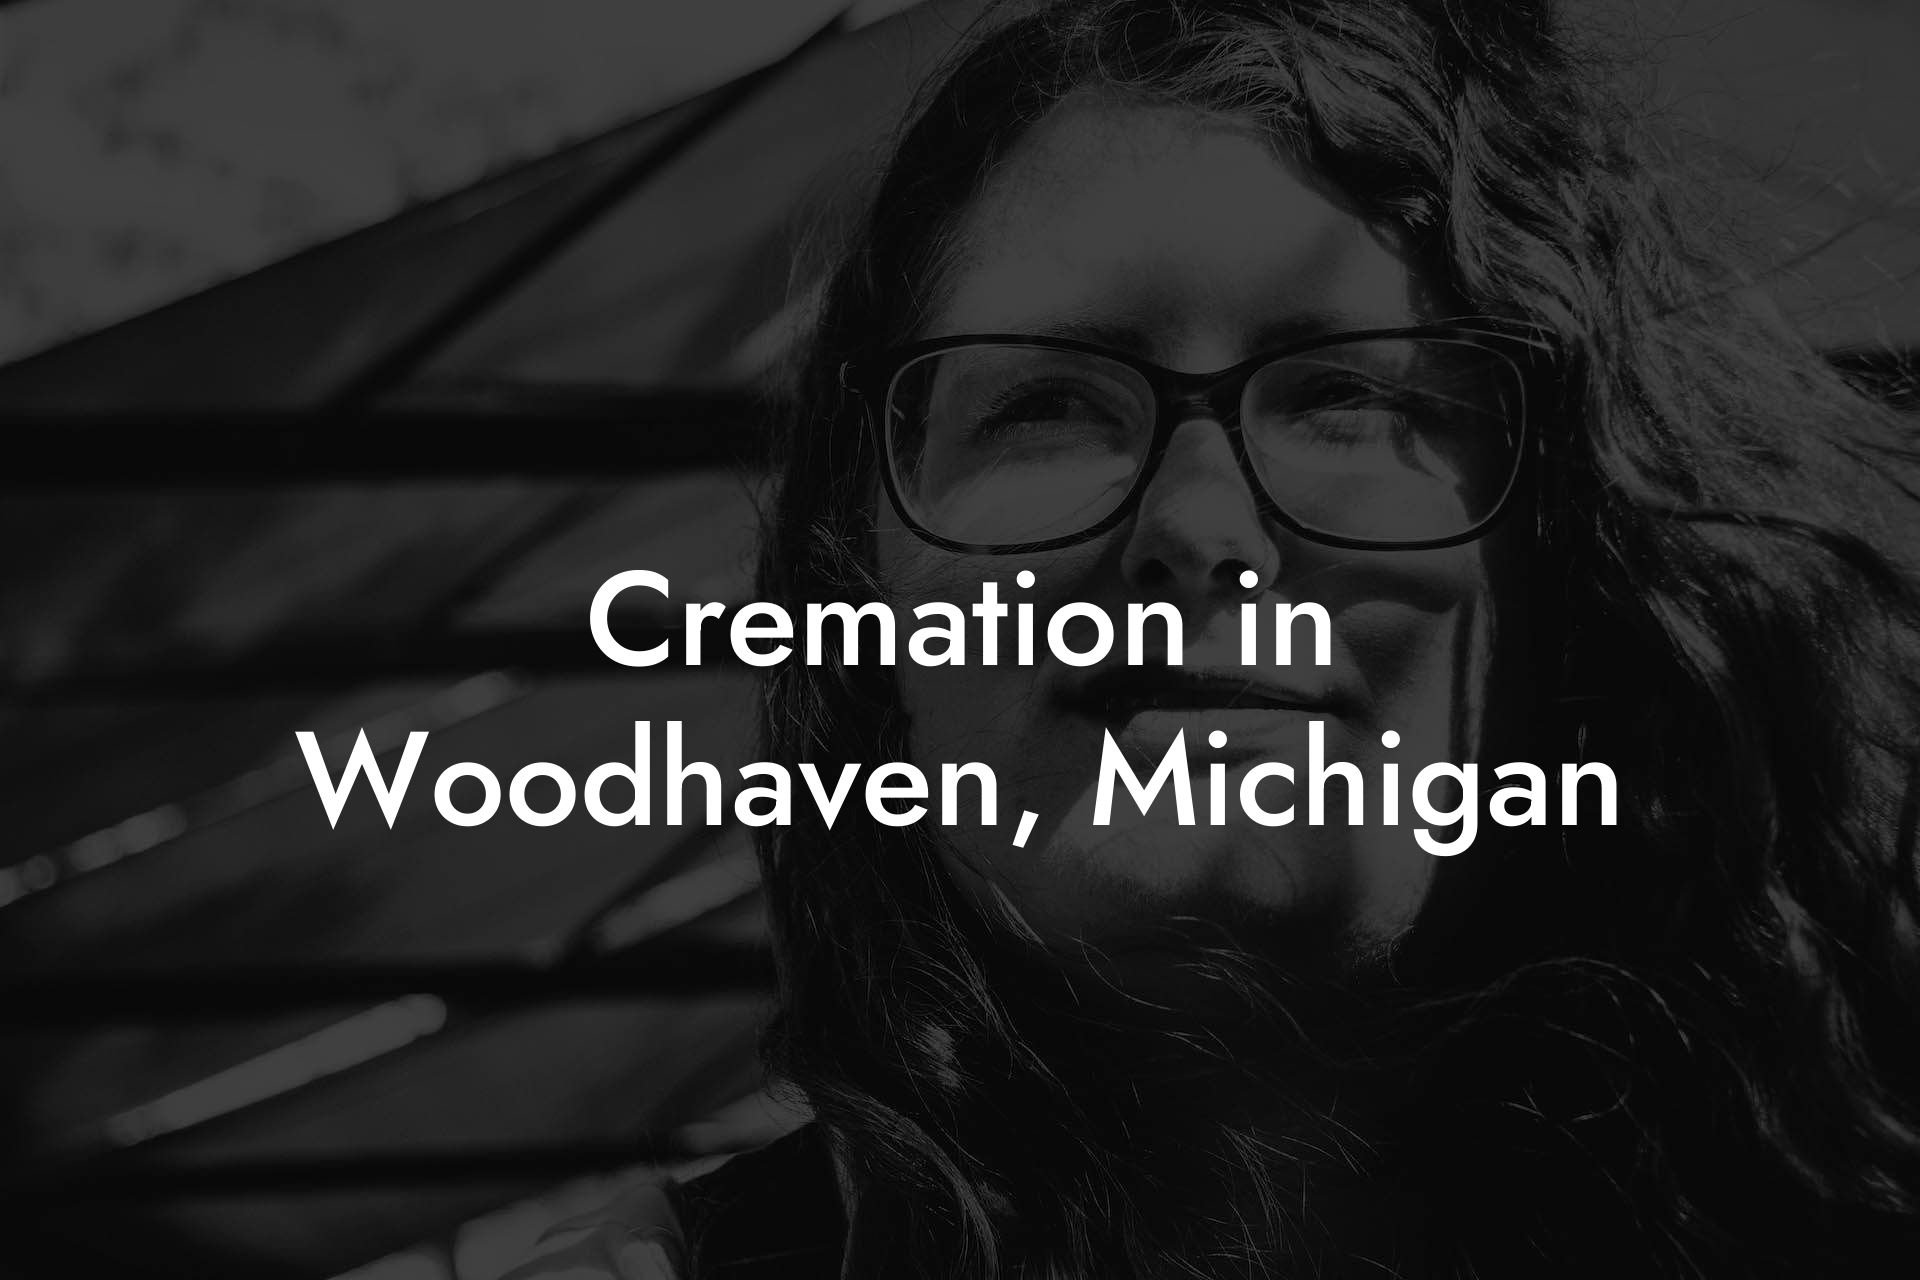 Cremation in Woodhaven, Michigan